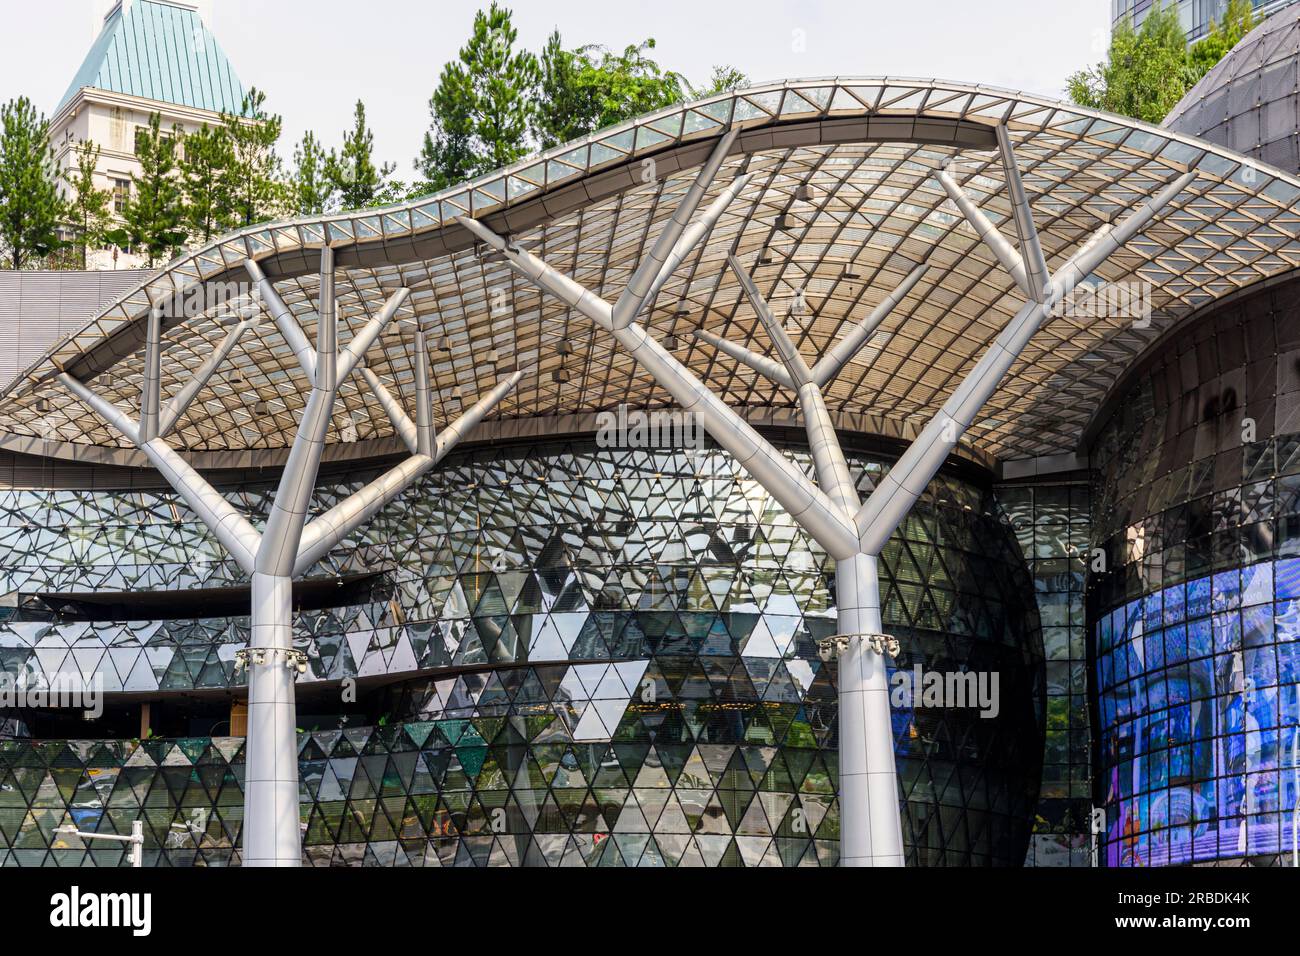 Tree like glass-and-steel canopy roof at the ION Orchard shopping mall, Singapore Stock Photo